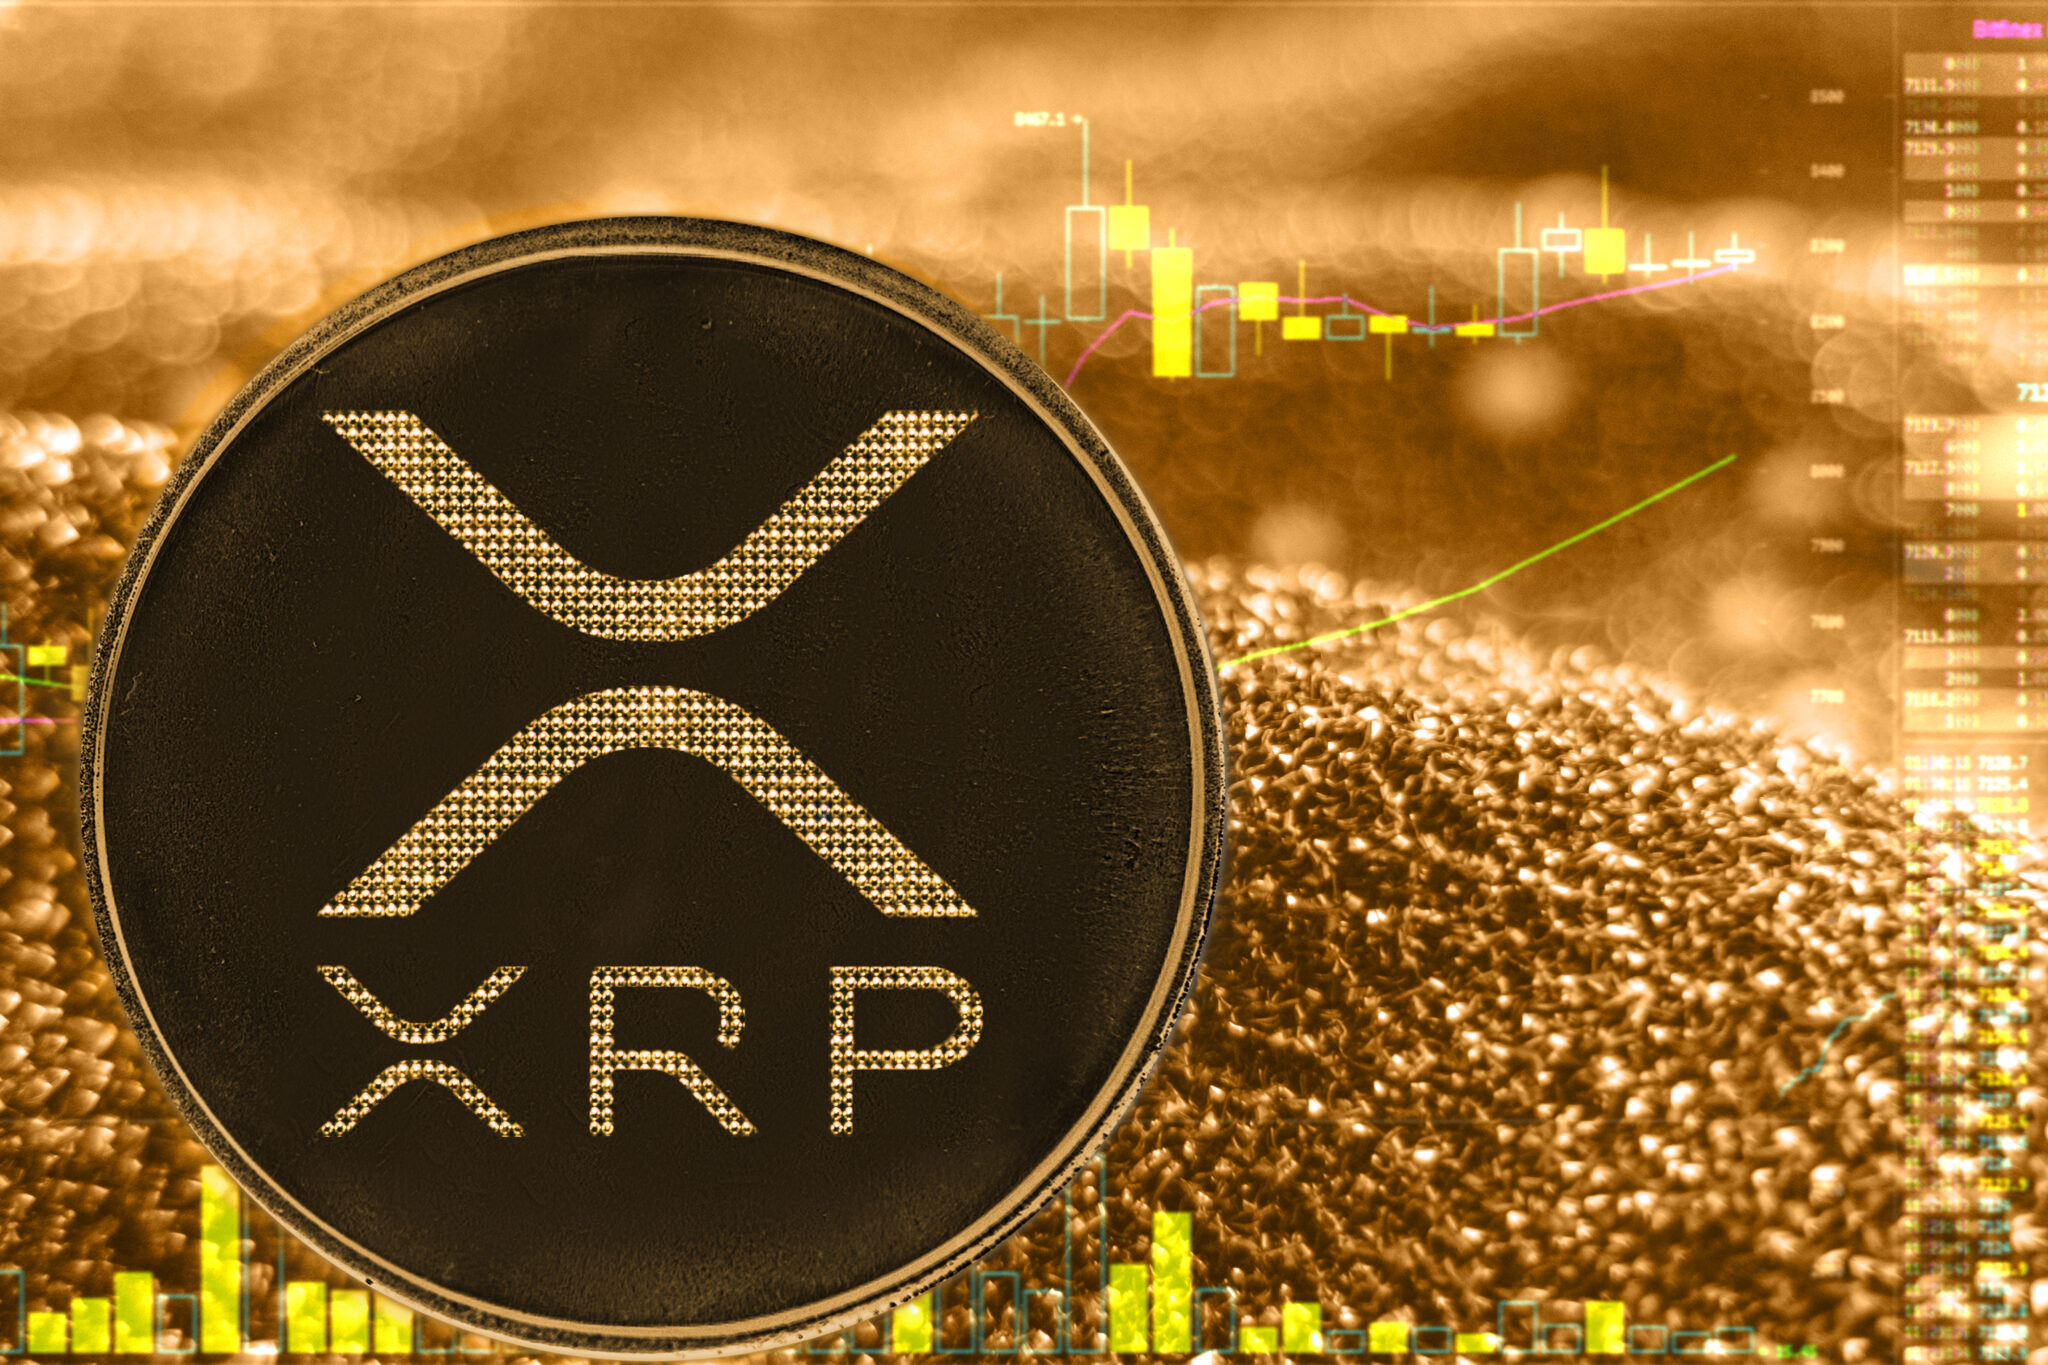 coin-cryptocurrency-xrp-ripple-on-golden-chart-stockpack-deposit-photos-scaled